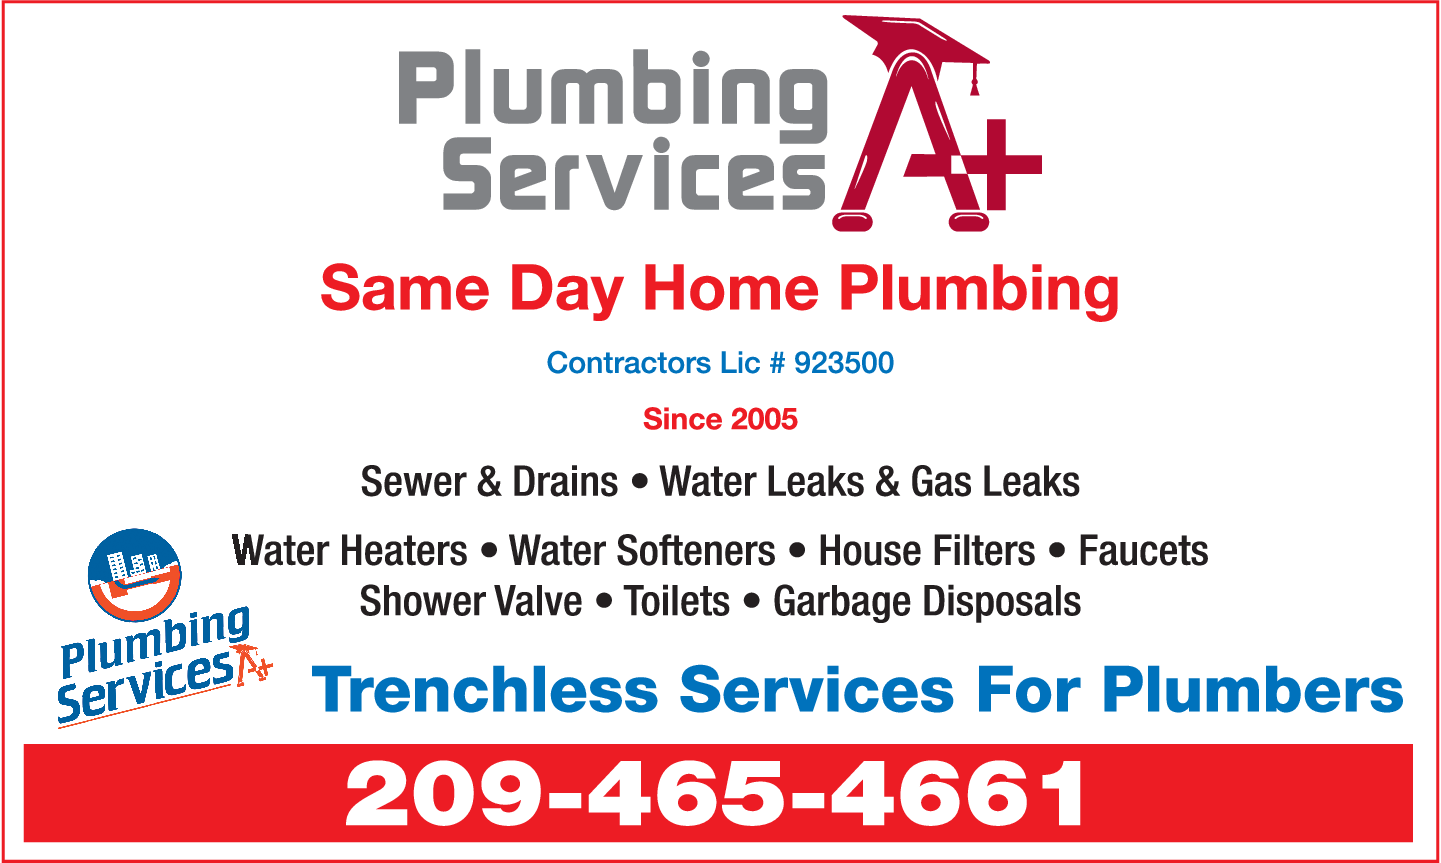 Plumbing Services A +